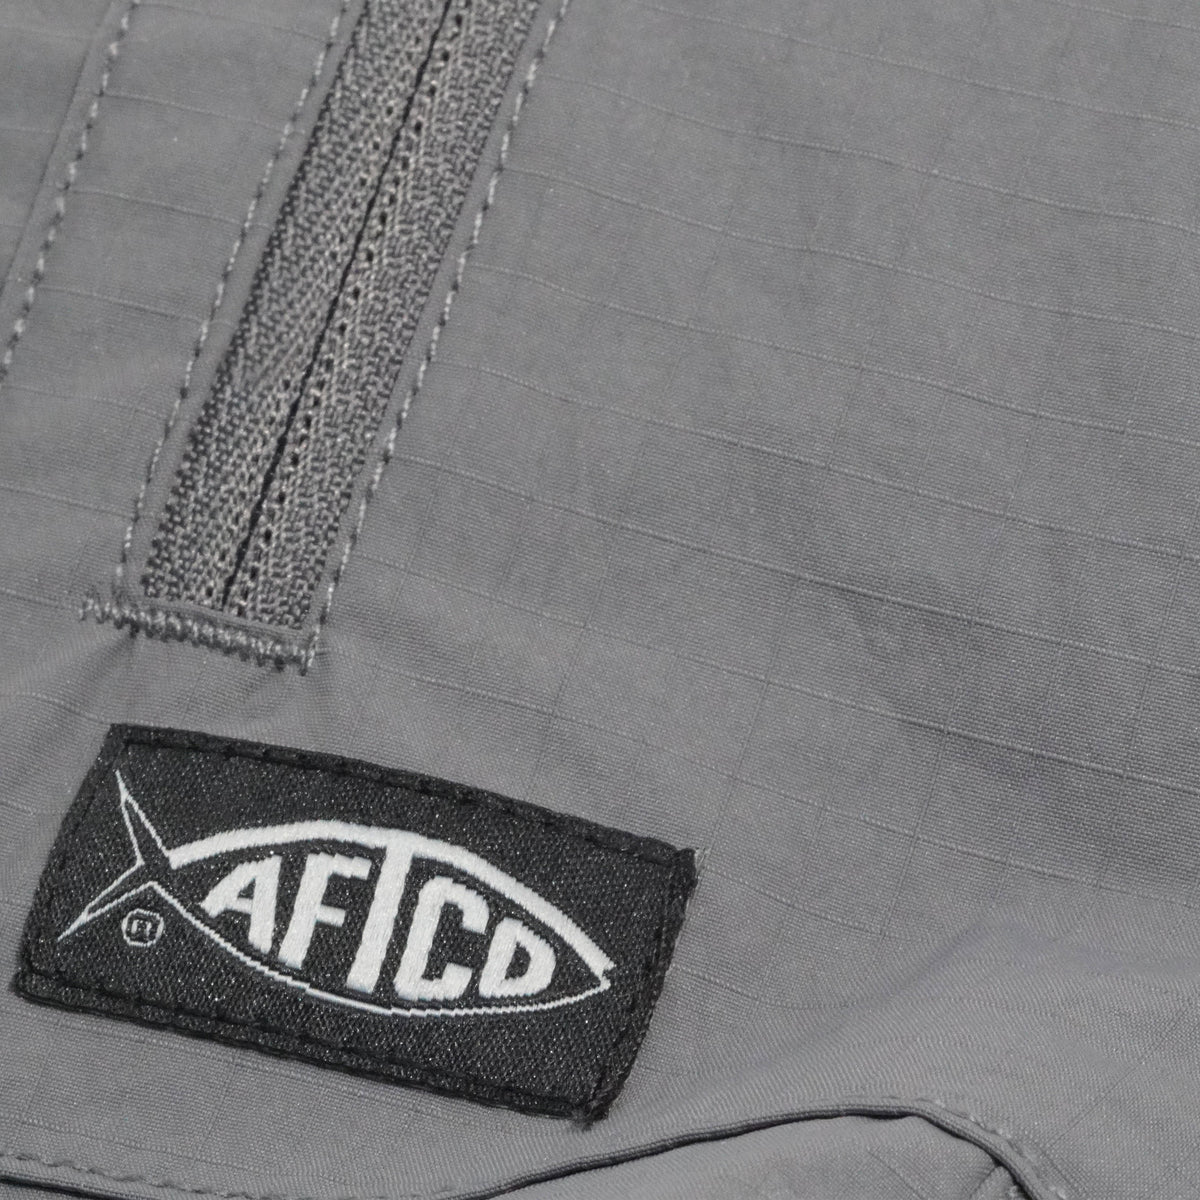 AFTCO Rescue Fishing Shorts